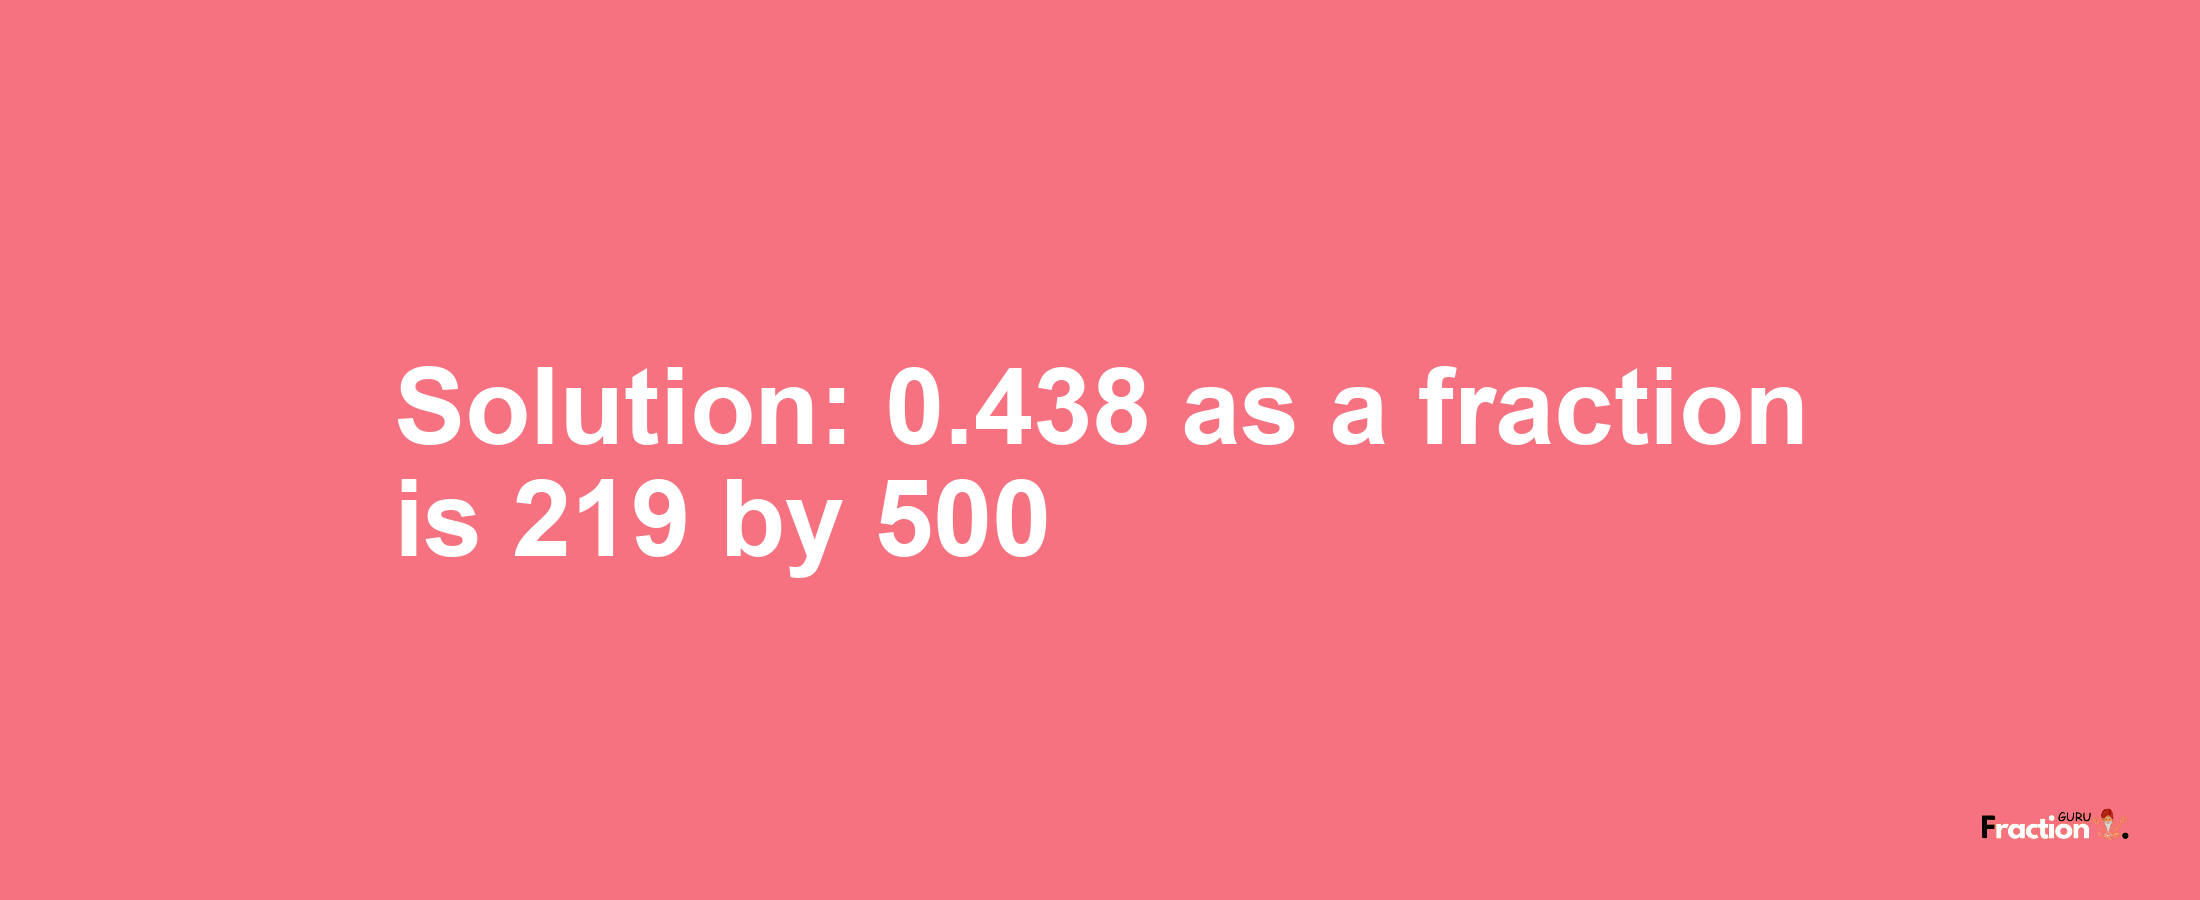 Solution:0.438 as a fraction is 219/500